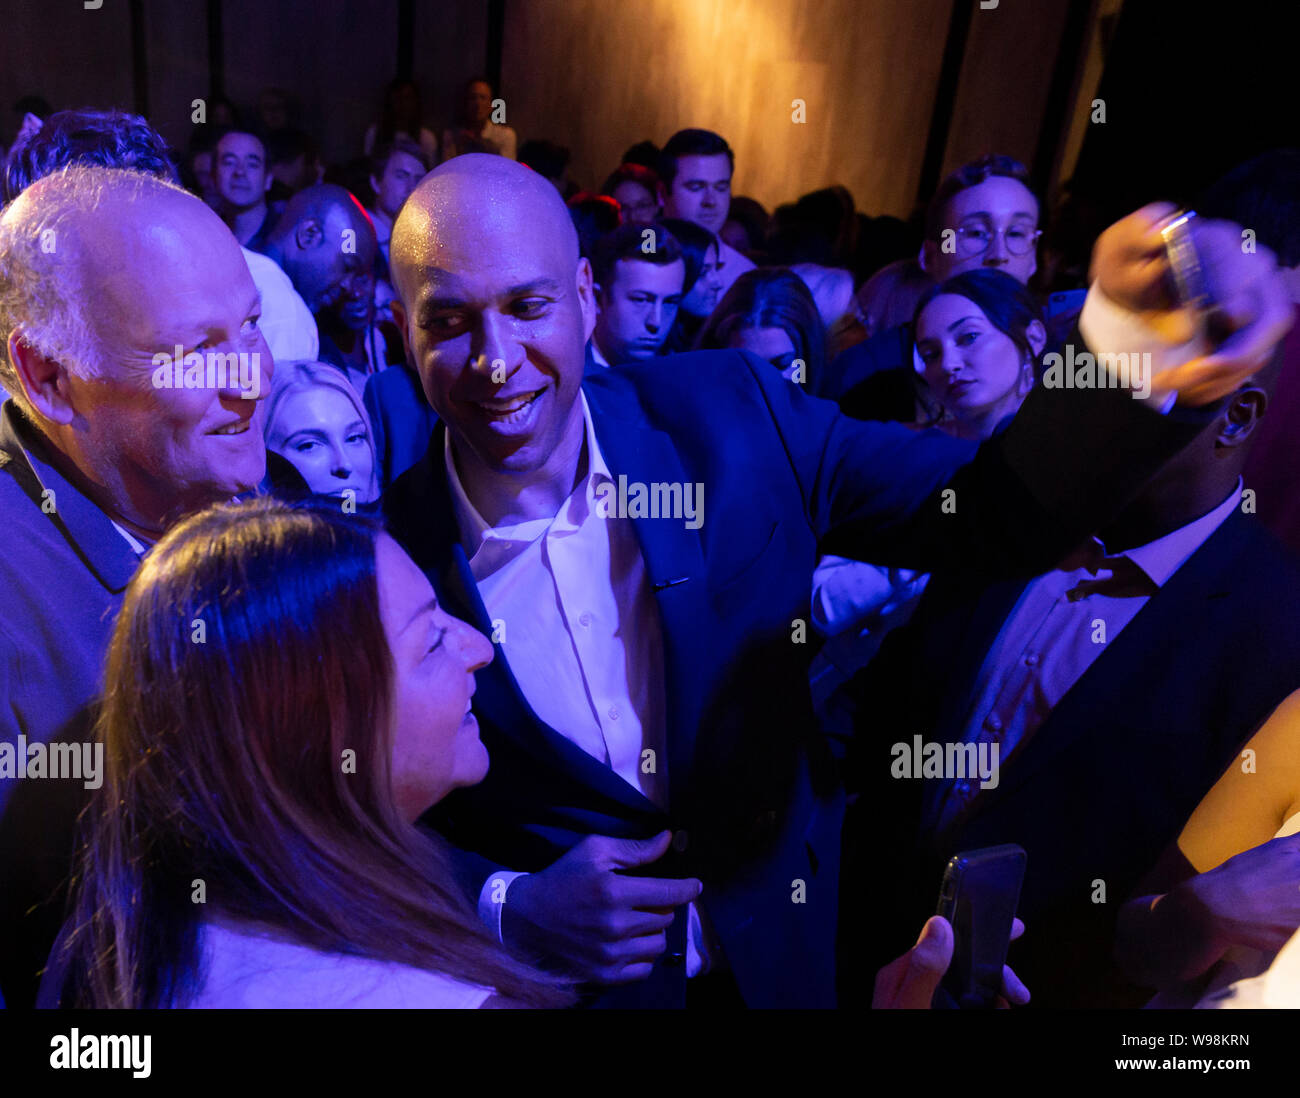 New York, NY - August 12, 2019: Democratic presidential candidate US Senator Cory Booker poses for photos with supporters at campaign grassroots Happy Hour fundraiser event at the nightclub Slate Stock Photo